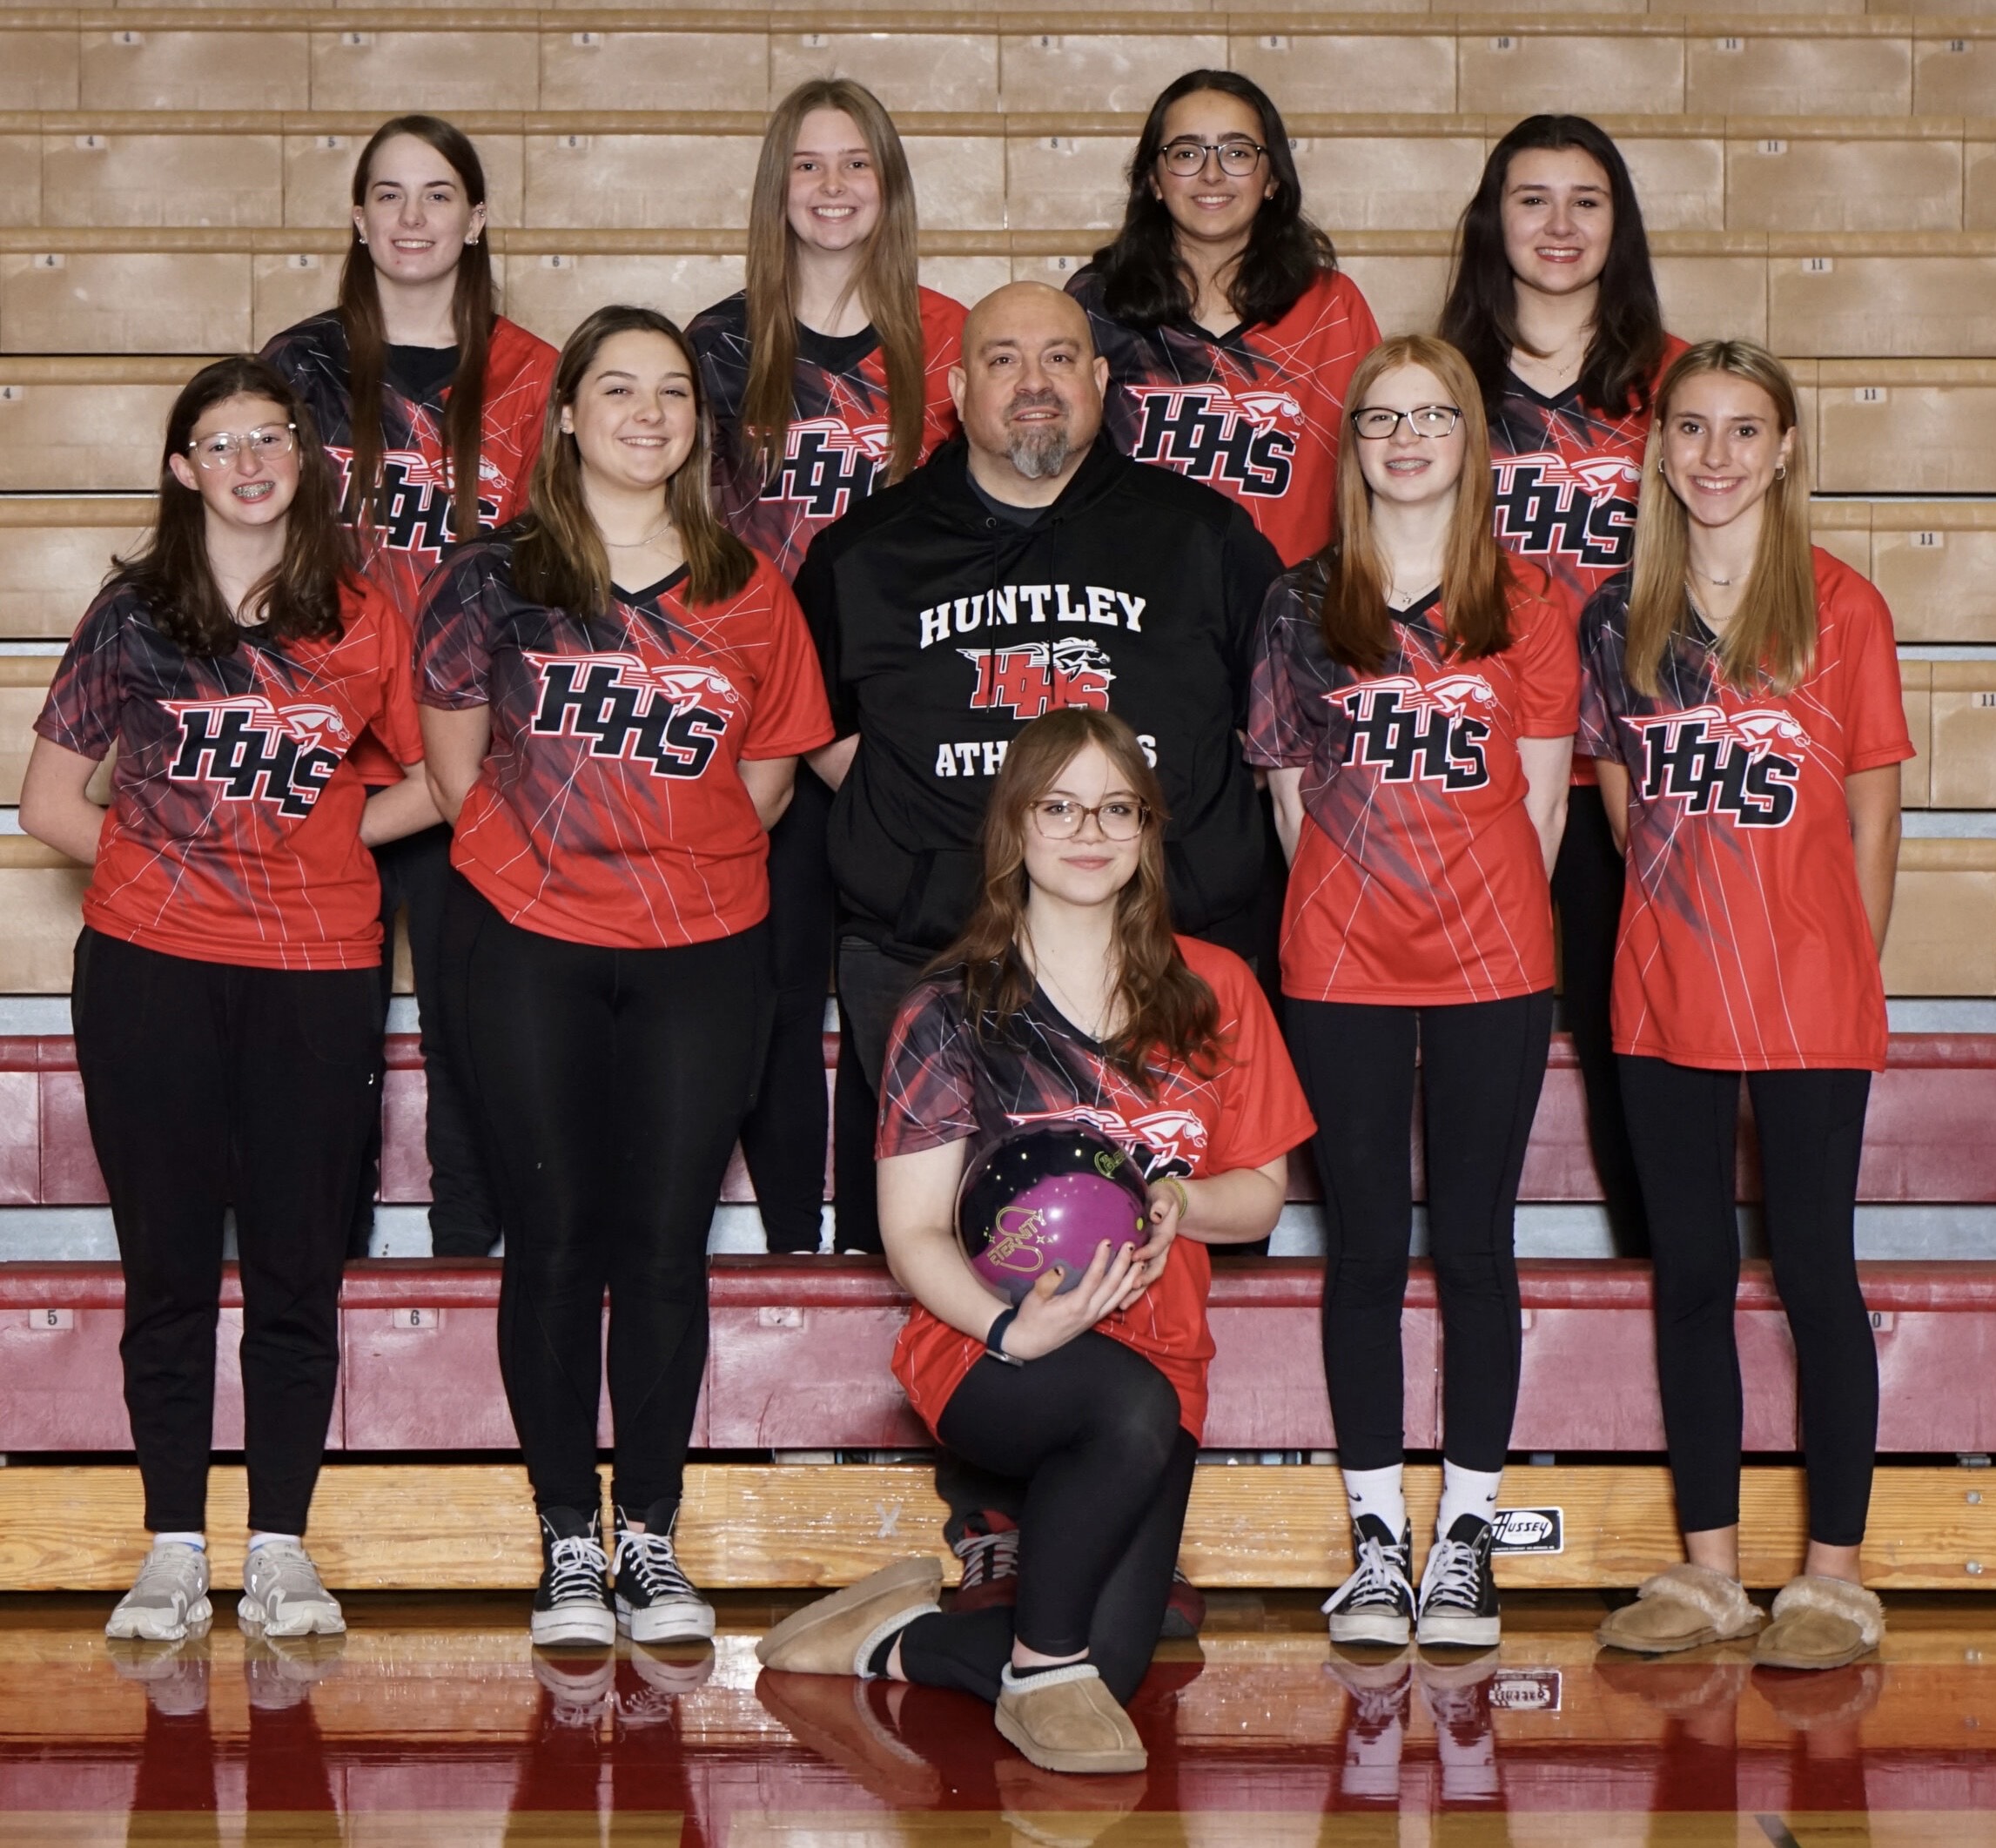 The Huntley girls bowling team for 2023-24, front, Erica DeBello. Middle row, from left, Isabella Kurash, Kaelyn Keegan, coach Eric DeBello, Mackenzie Miller and Ashlyn Tenglin. Back row from left:, Tara Wise, Jana Boudreau, Prianca Waters and Katie Scaletta.